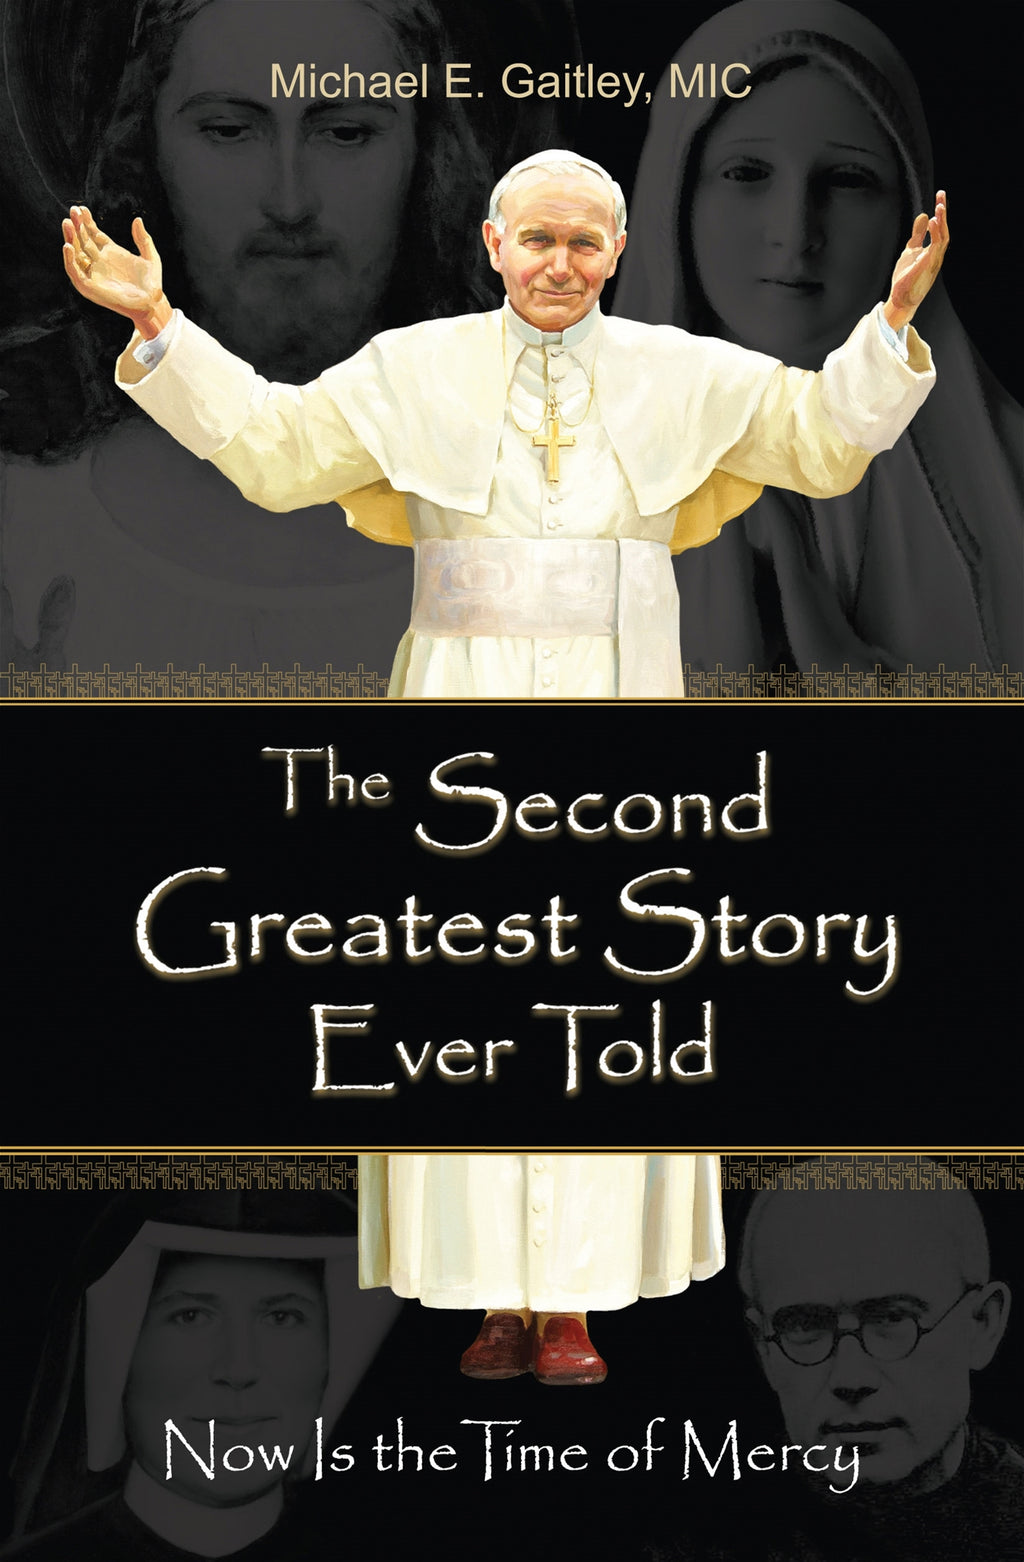 THE SECOND GREATEST STORY